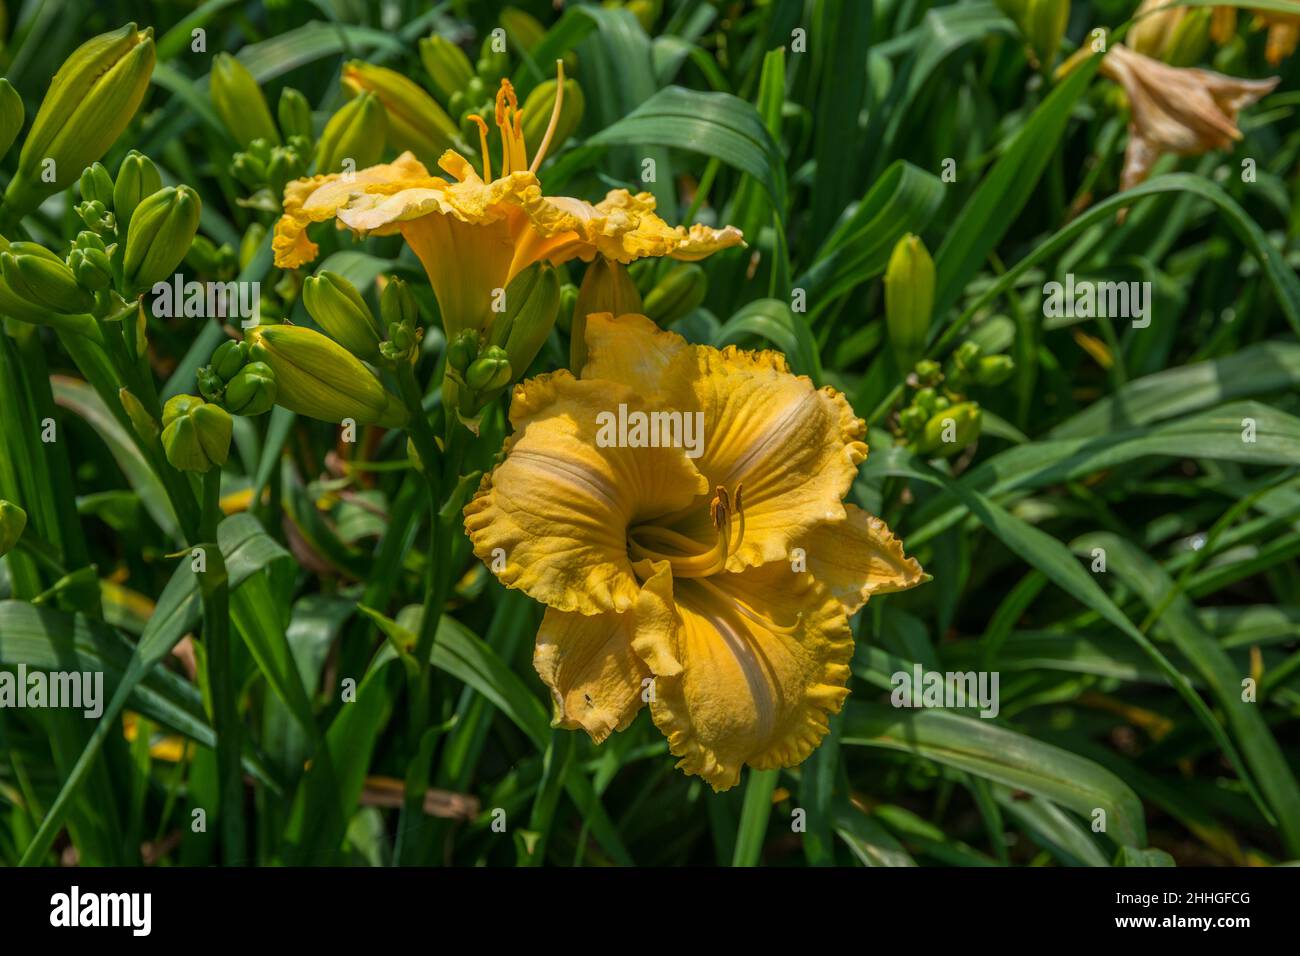 A pair of deep yellow daylilies with ruffled petals in full bloom surrounded by clusters of unopened buds closeup view on a bright sunny day in summer Stock Photo